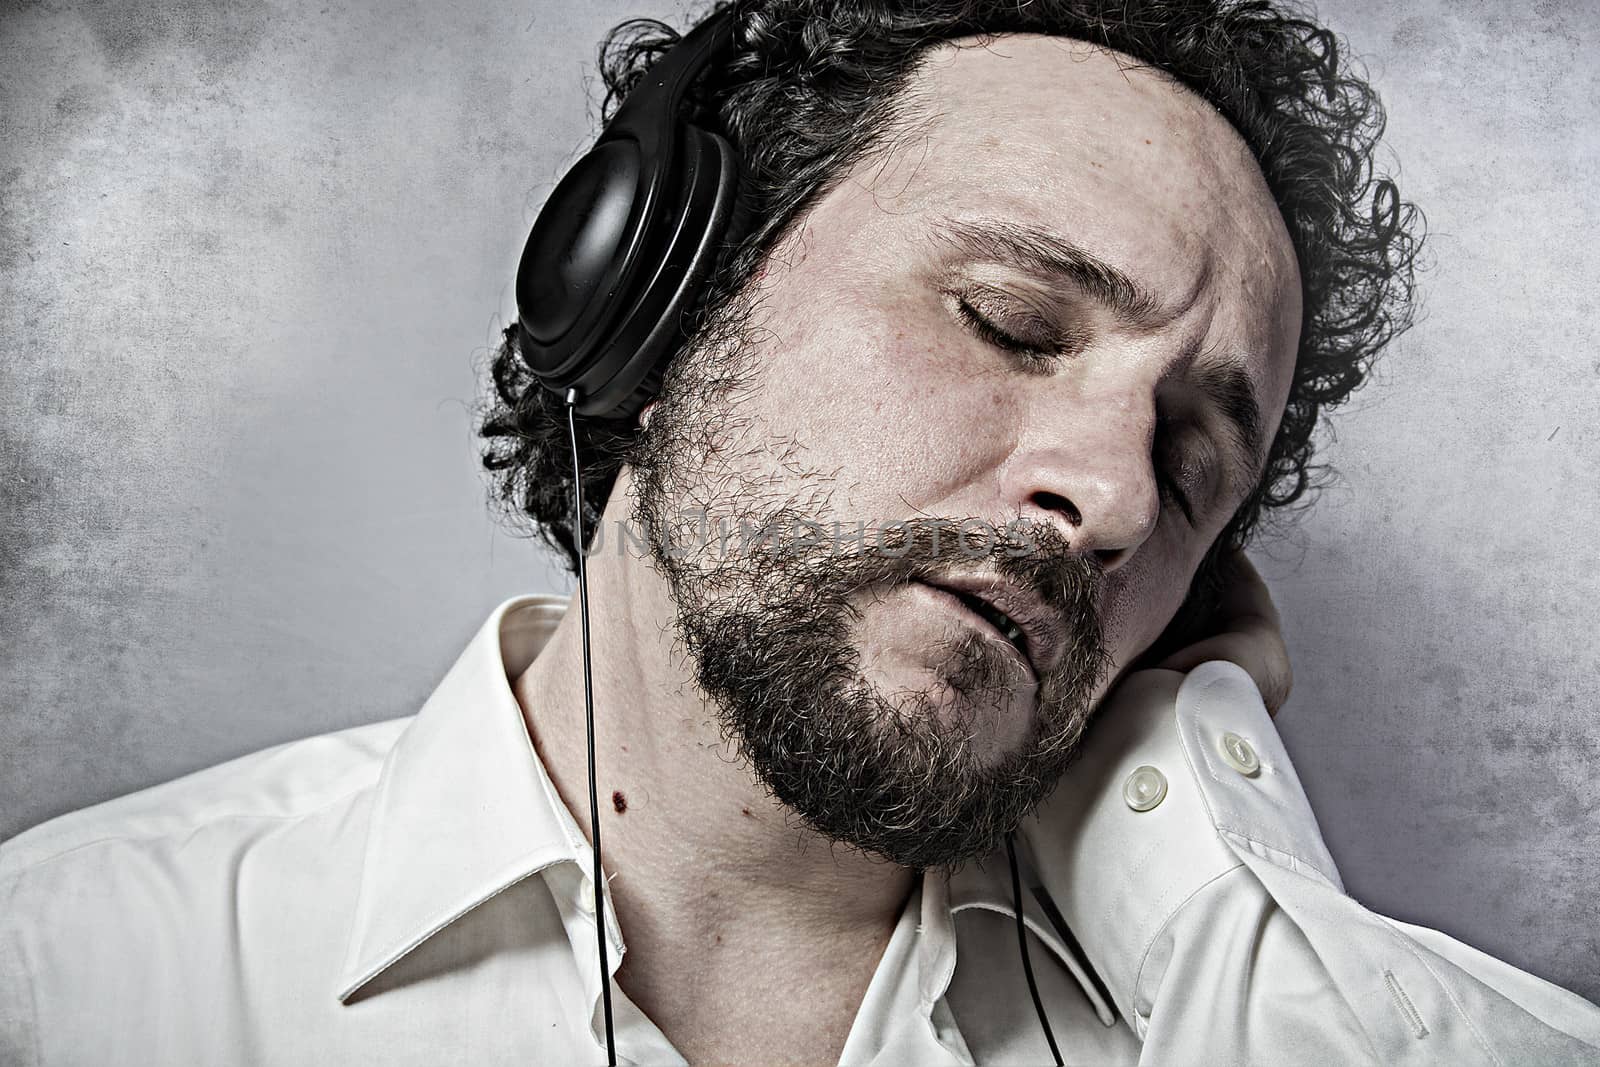 Joy, listening and enjoying music with headphones, man in white by FernandoCortes